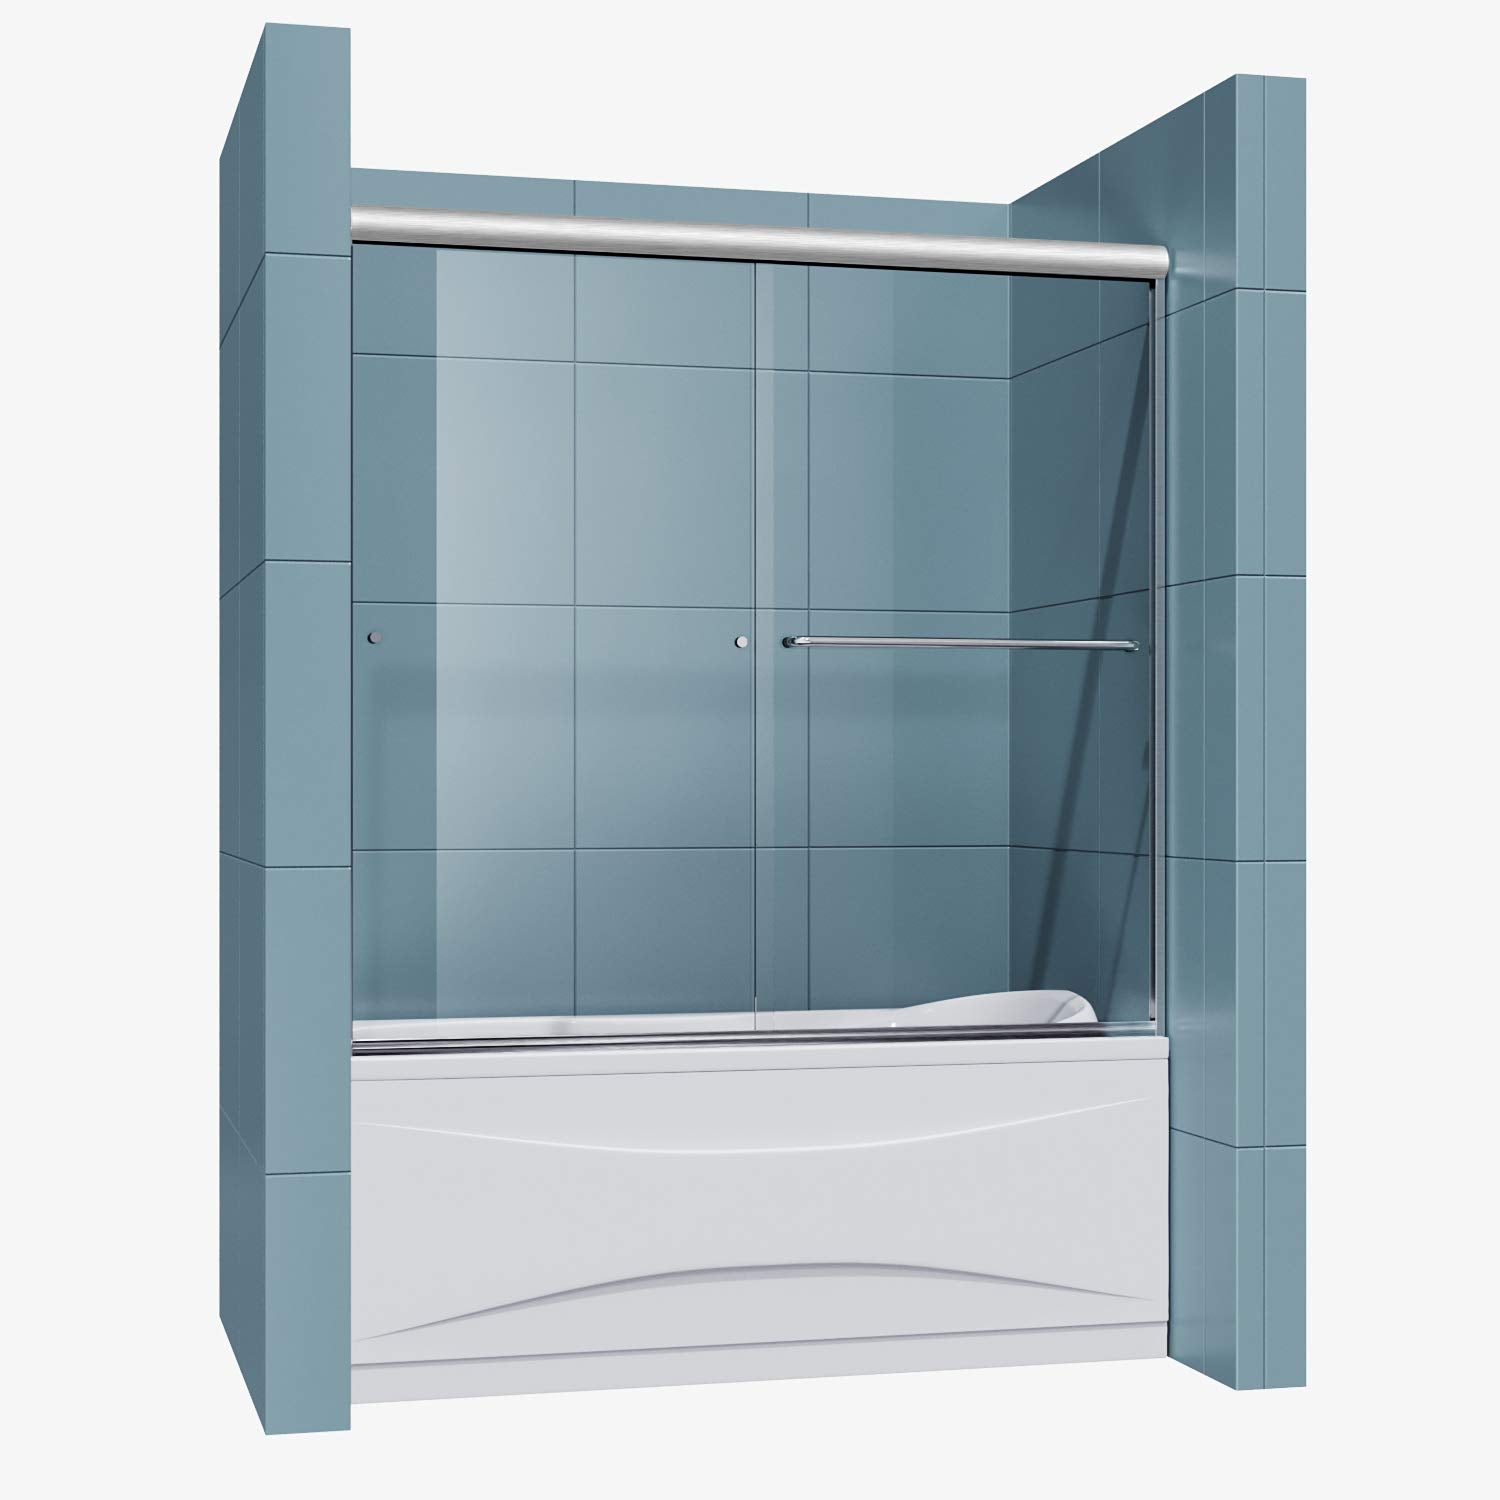 SUNNY SHOWER 60 in. W x 57.4 in. H Brushed Nickel Finish Bathtub Double Sliding Doors - SUNNY SHOWER